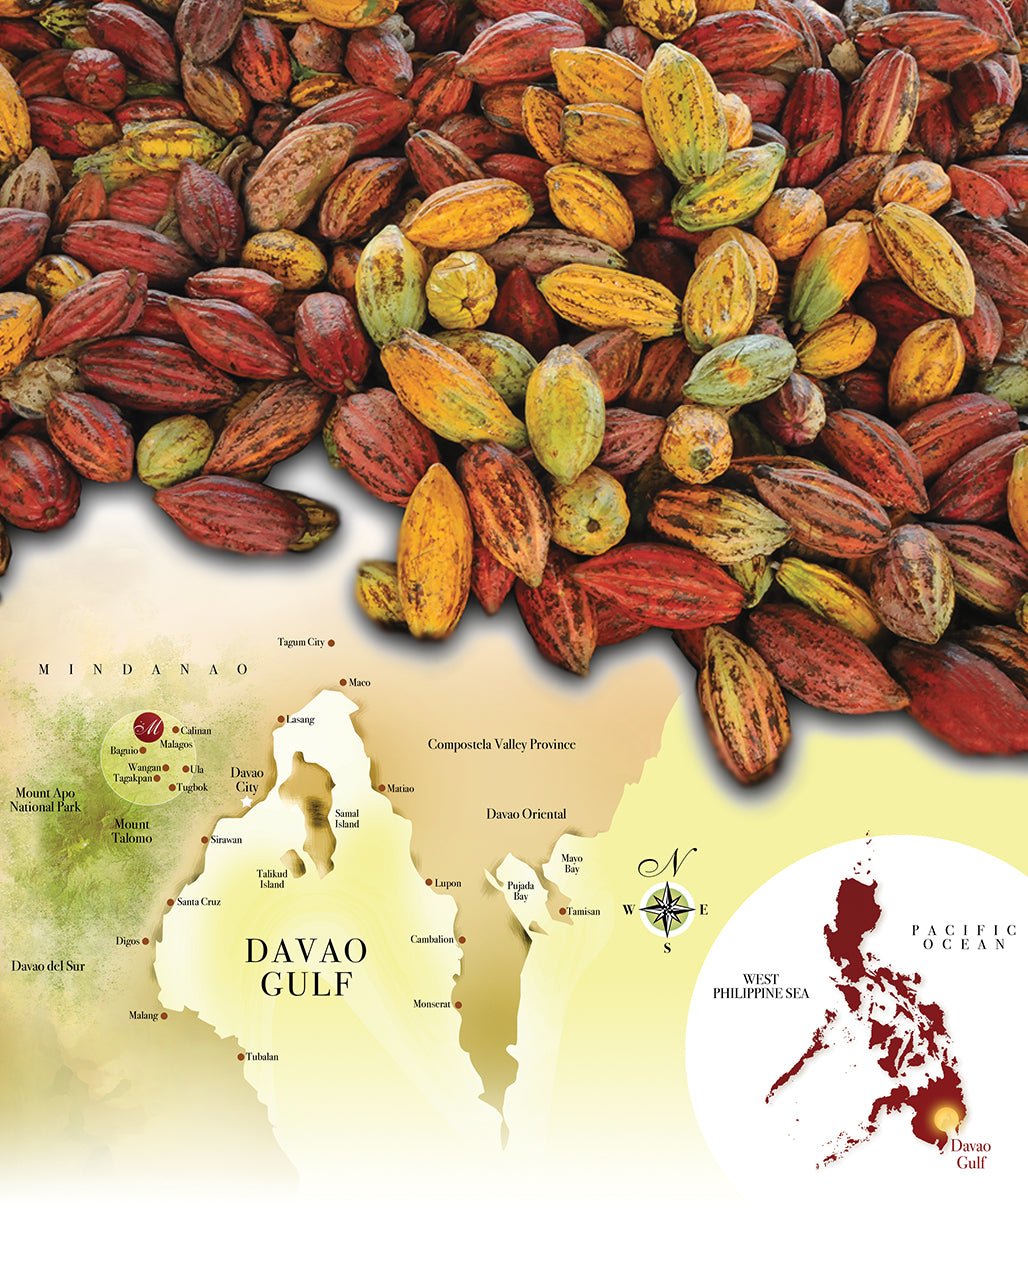 Davao City Declared as Chocolate Capital of the Philippines!